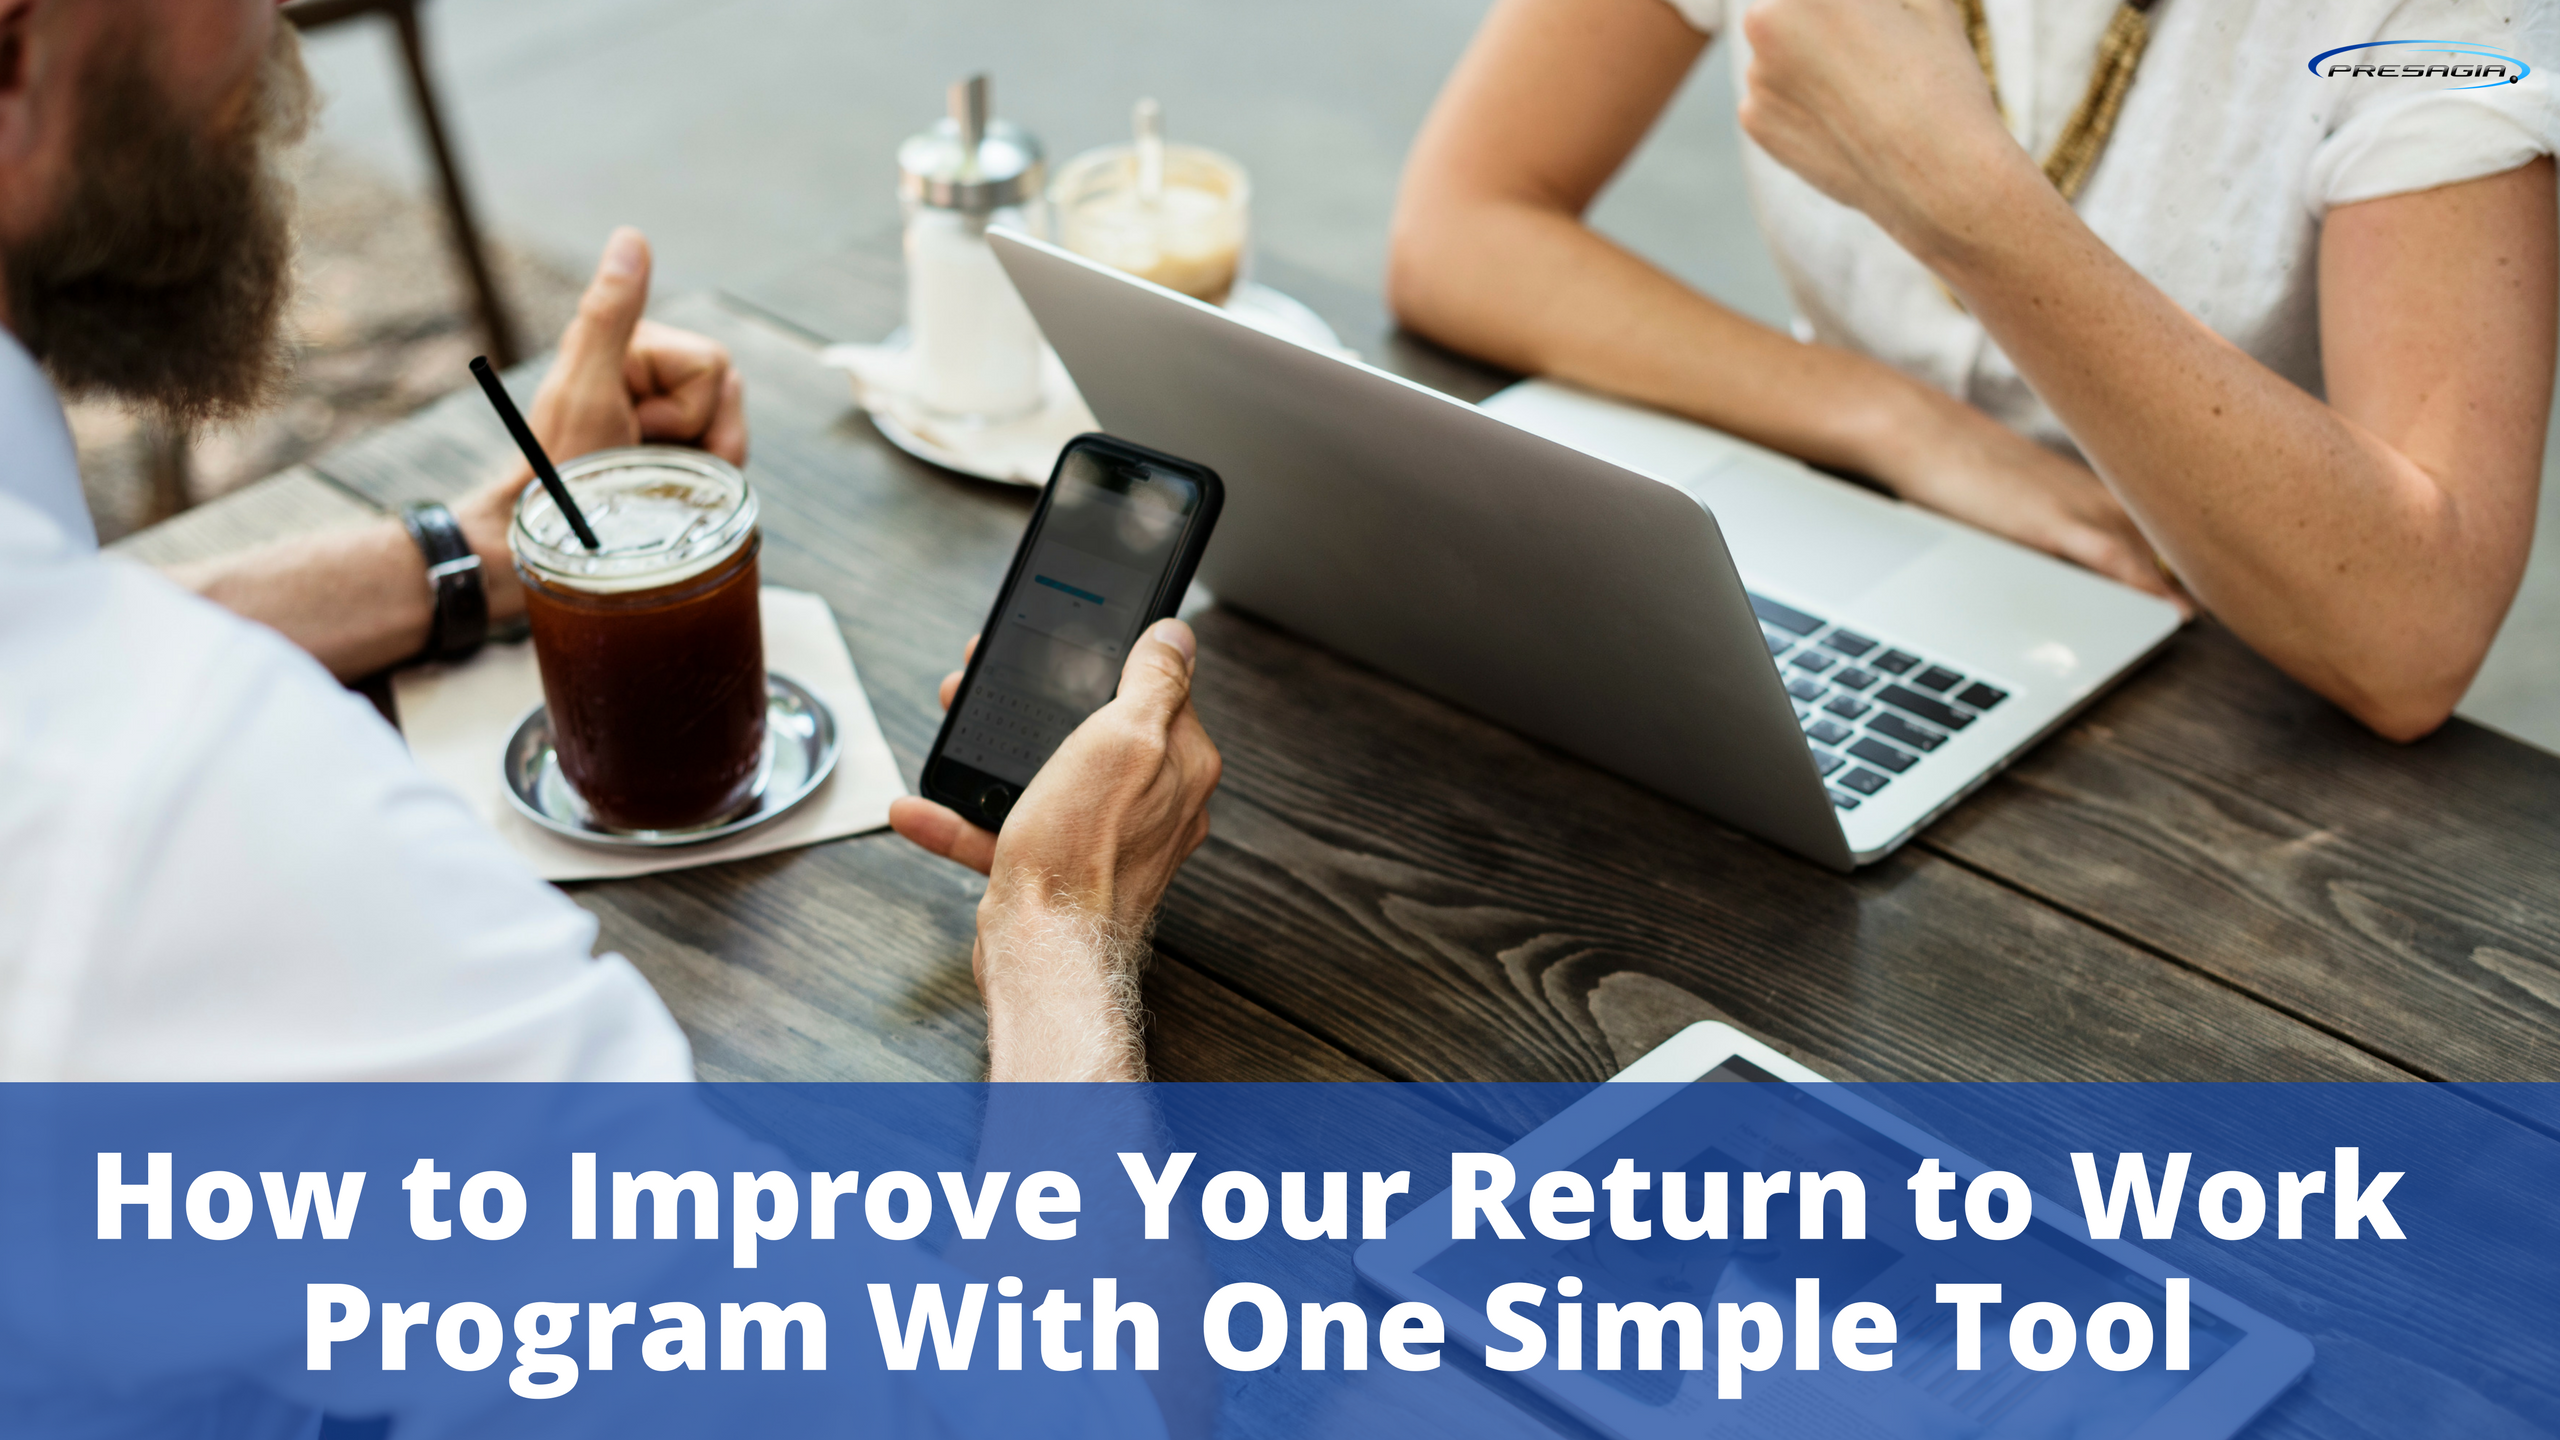 How to Improve Your Return to Work Program With One Simple Tool